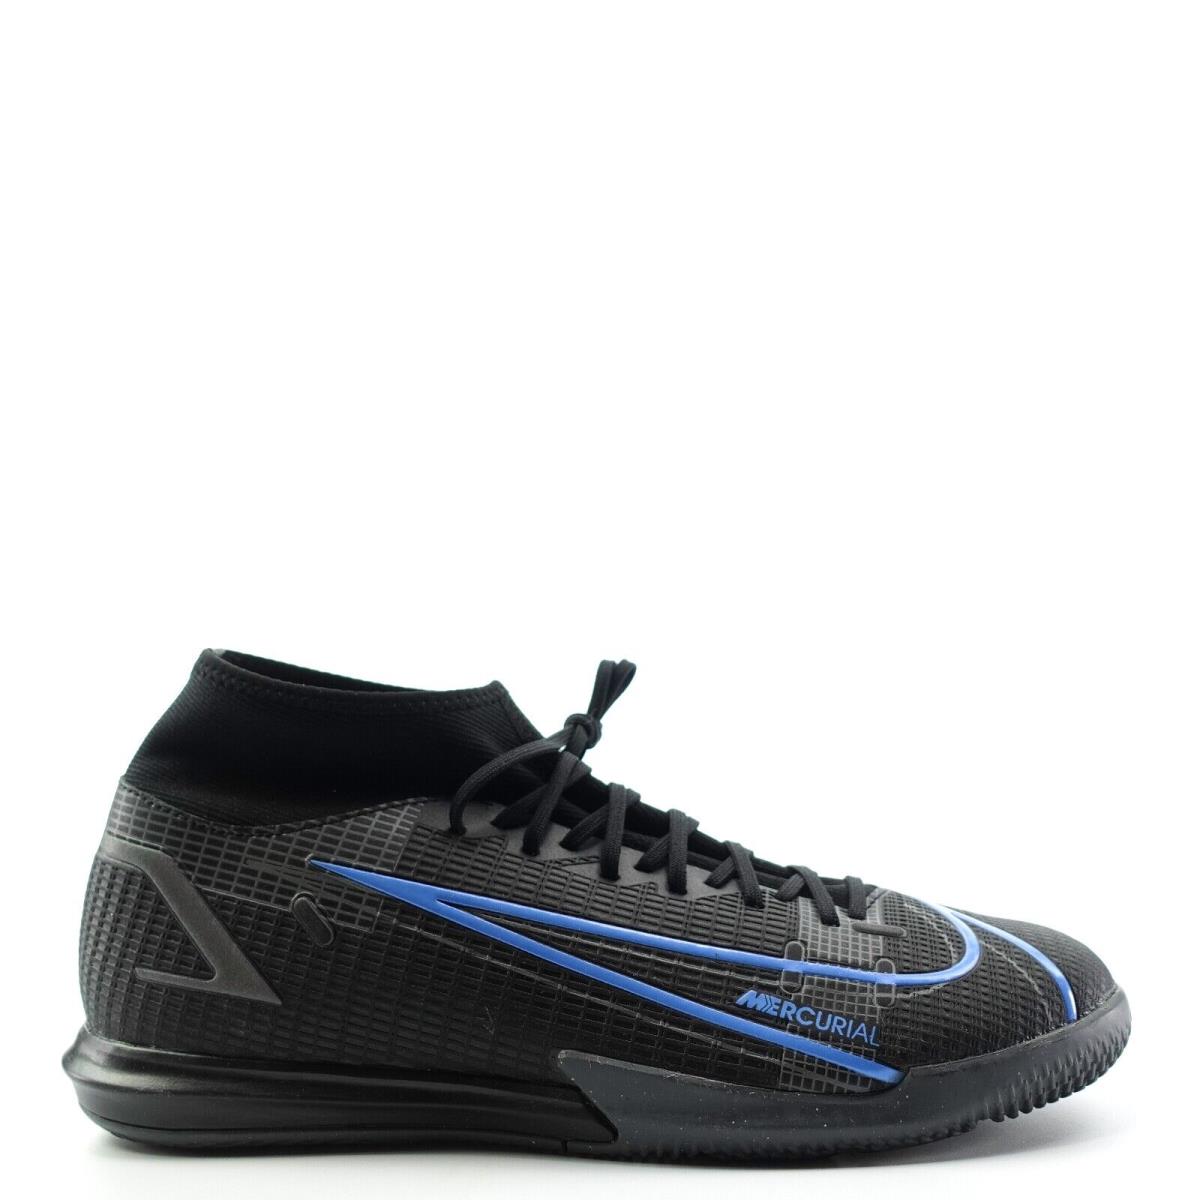 Nike Mercurial Superfly 8 Academy Indoor Court Soccer Shoes CV0847 004 Mens 10.5